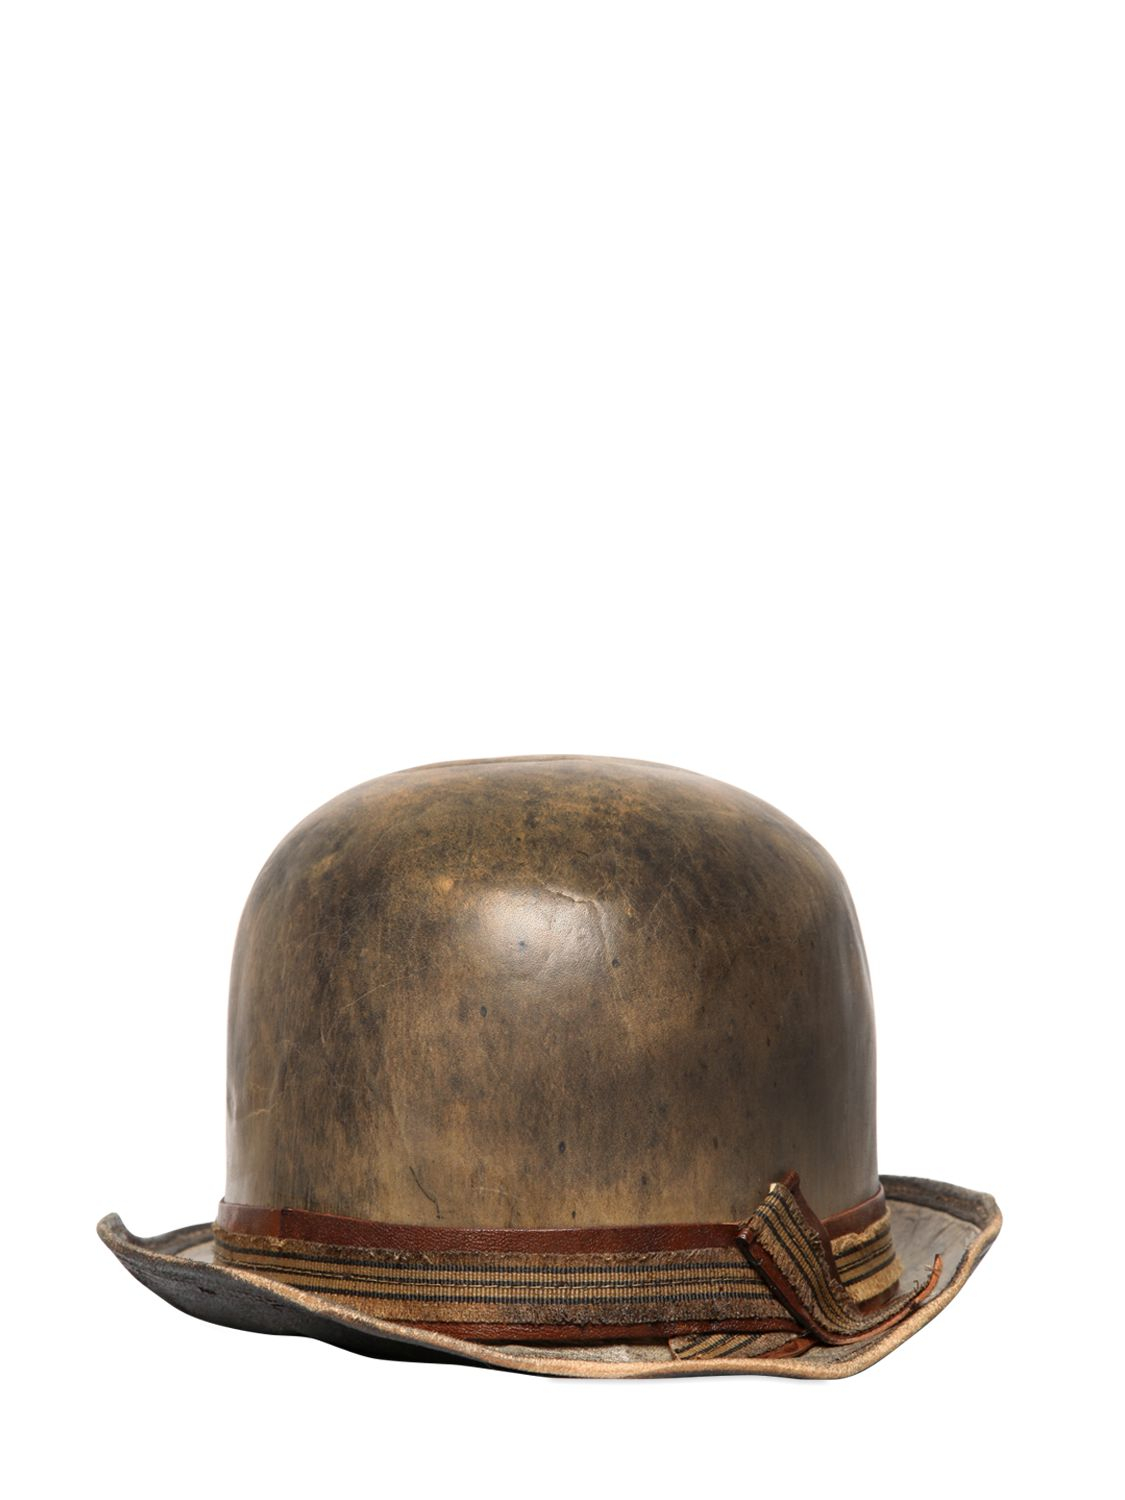 Move Officine Del Cappello Vintage Leather Bowler Hat in Brown | Lyst